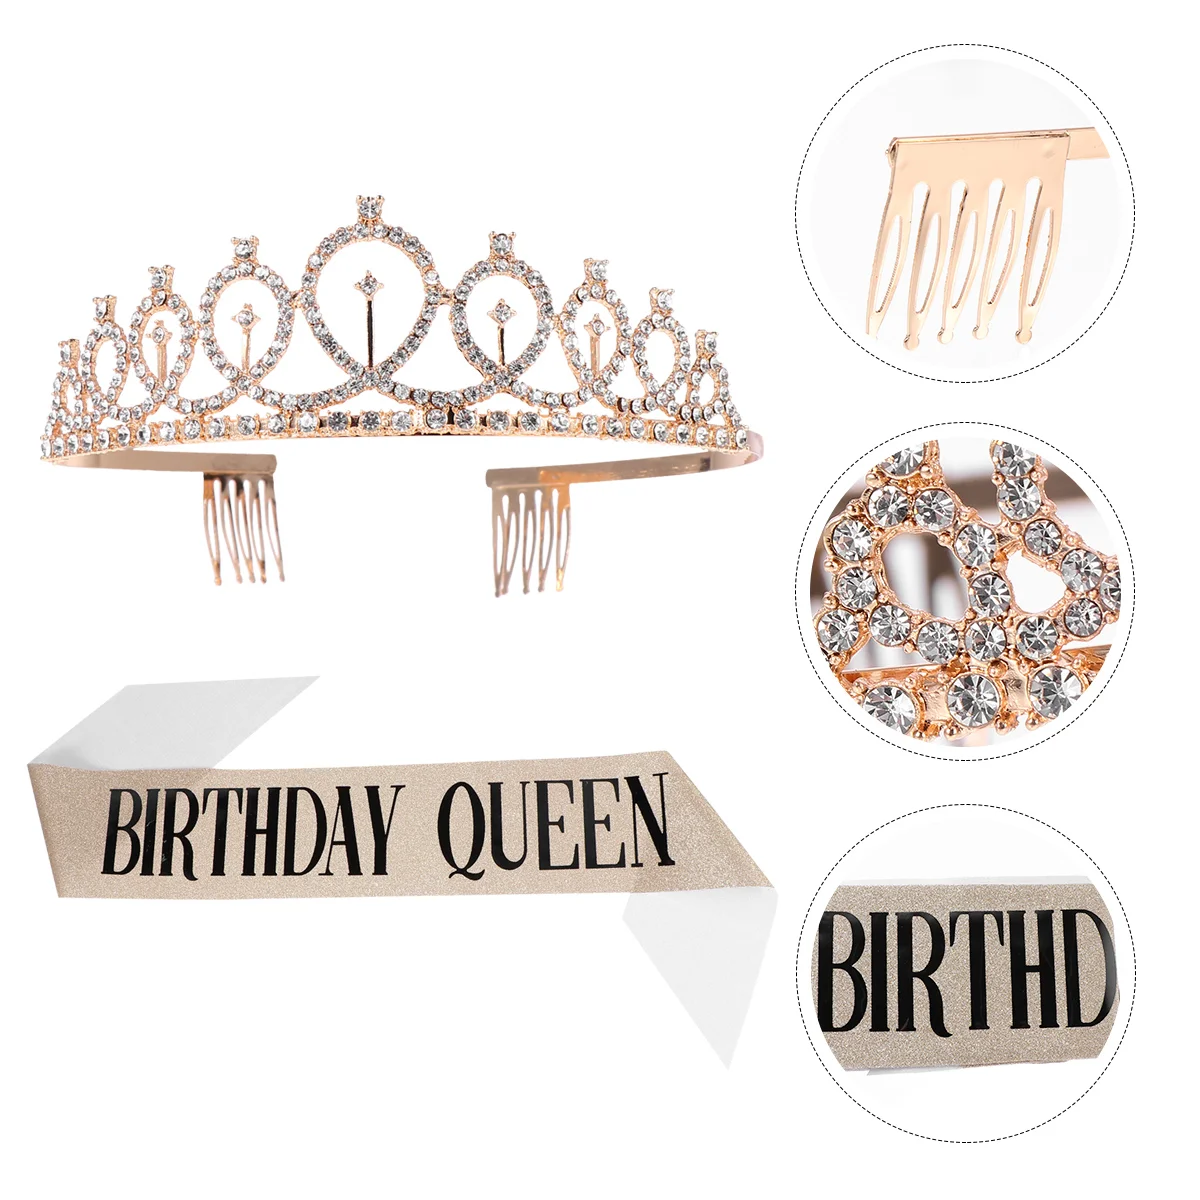 2pcs Birthday and Sash Rhinestone Tiara Glitter Satin Sash Birthday Photo Prop Birthday Party Supplies 2pcs set toilet seat top fix seat hinge hole fixings well nut screws rubber back to wall toilet cover screw cover plate supplies